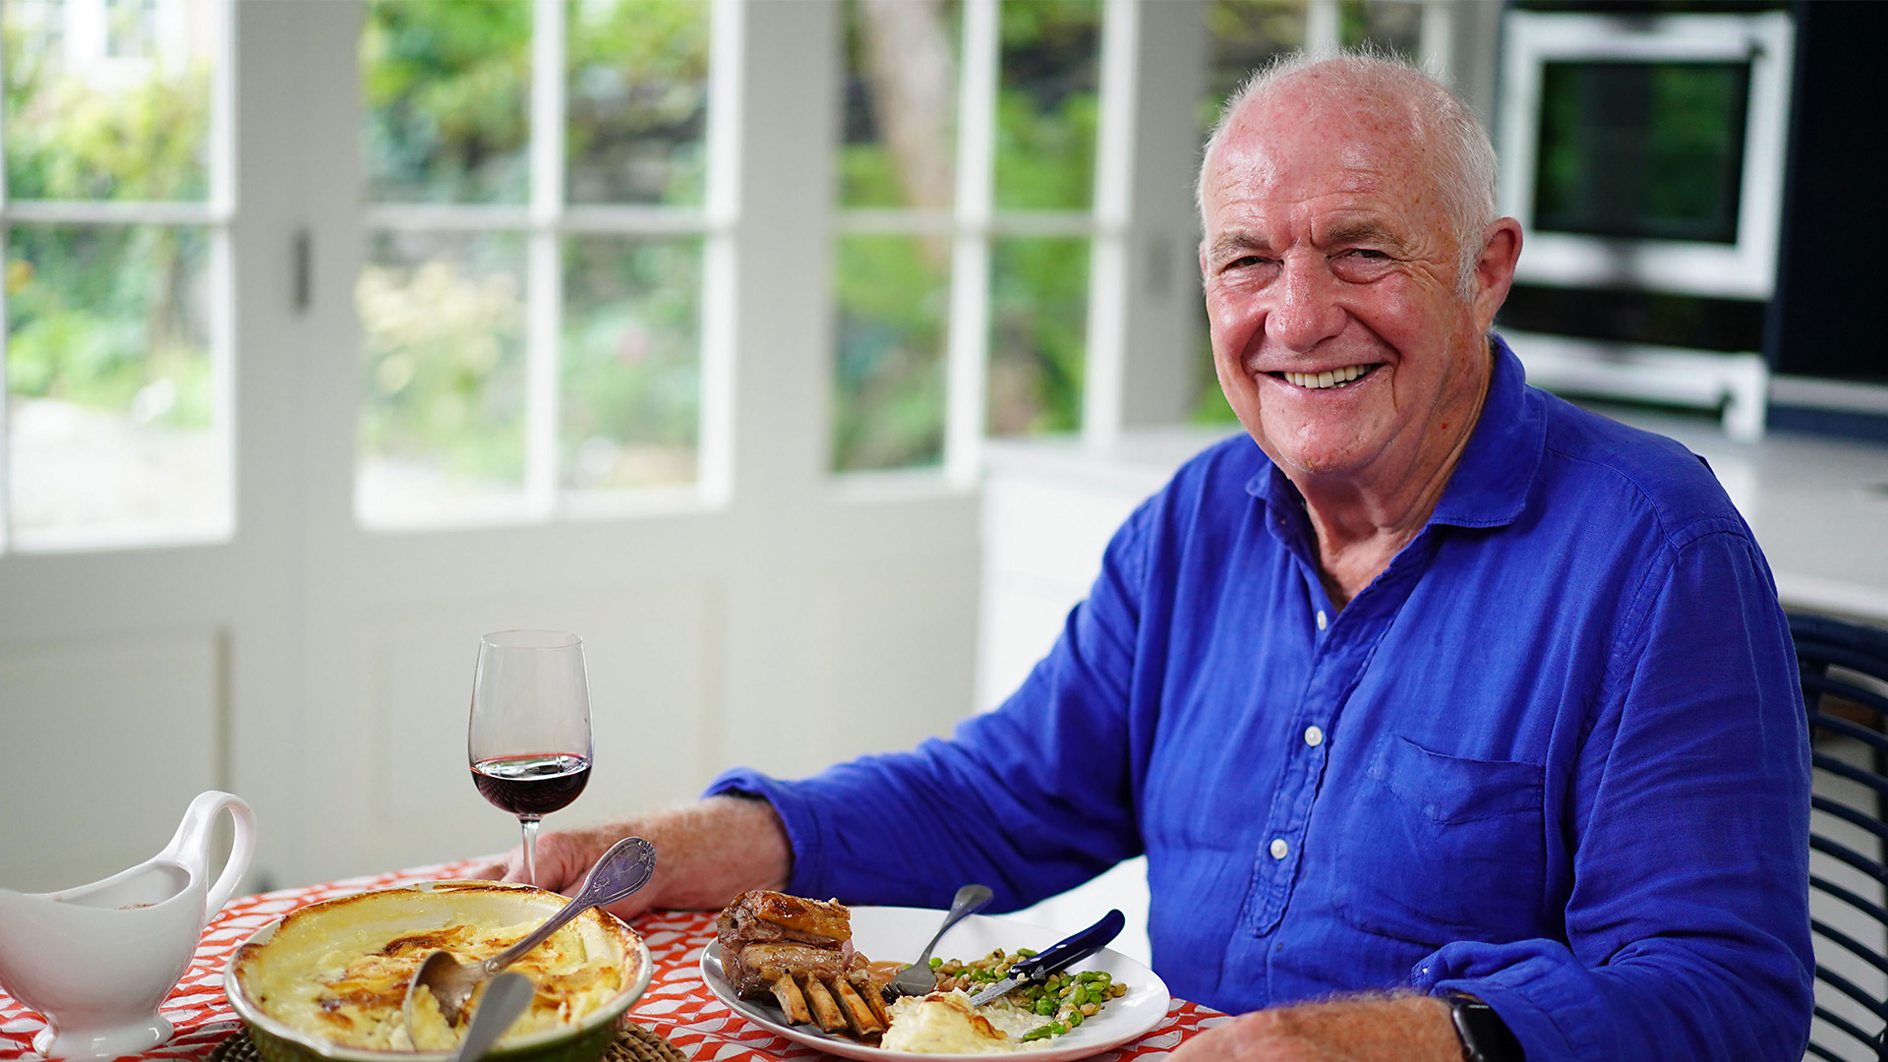 Rick Stein’s Food Stories commissioned for BBC Two